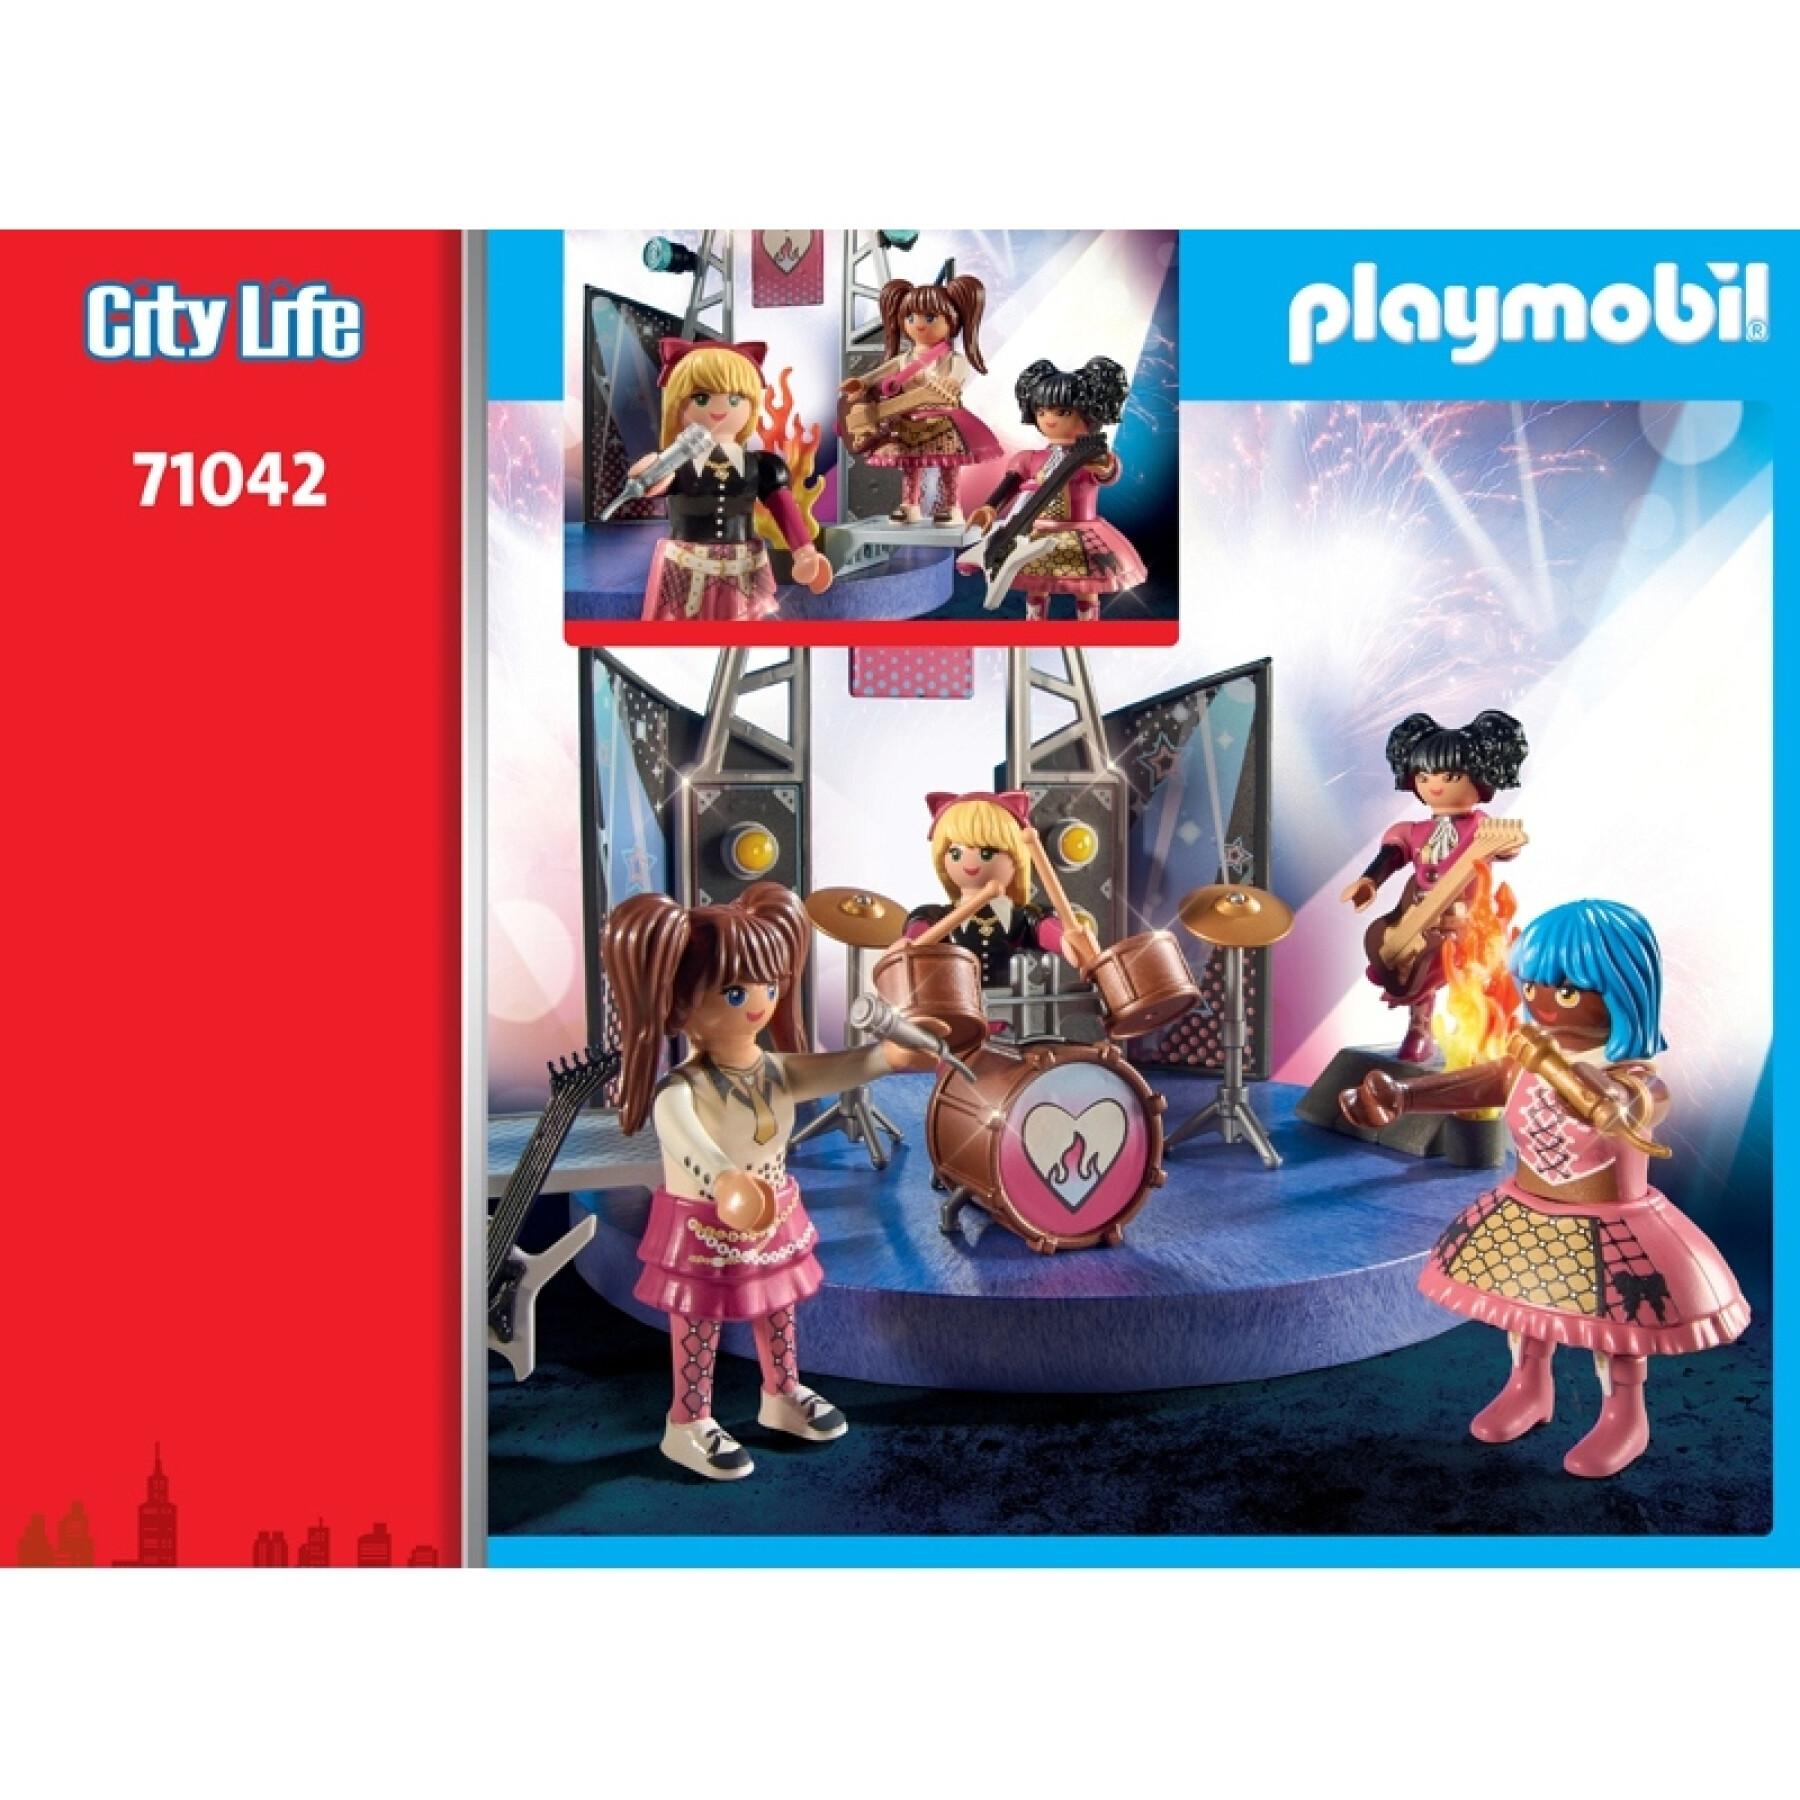 Early-learning games rock band Playmobil